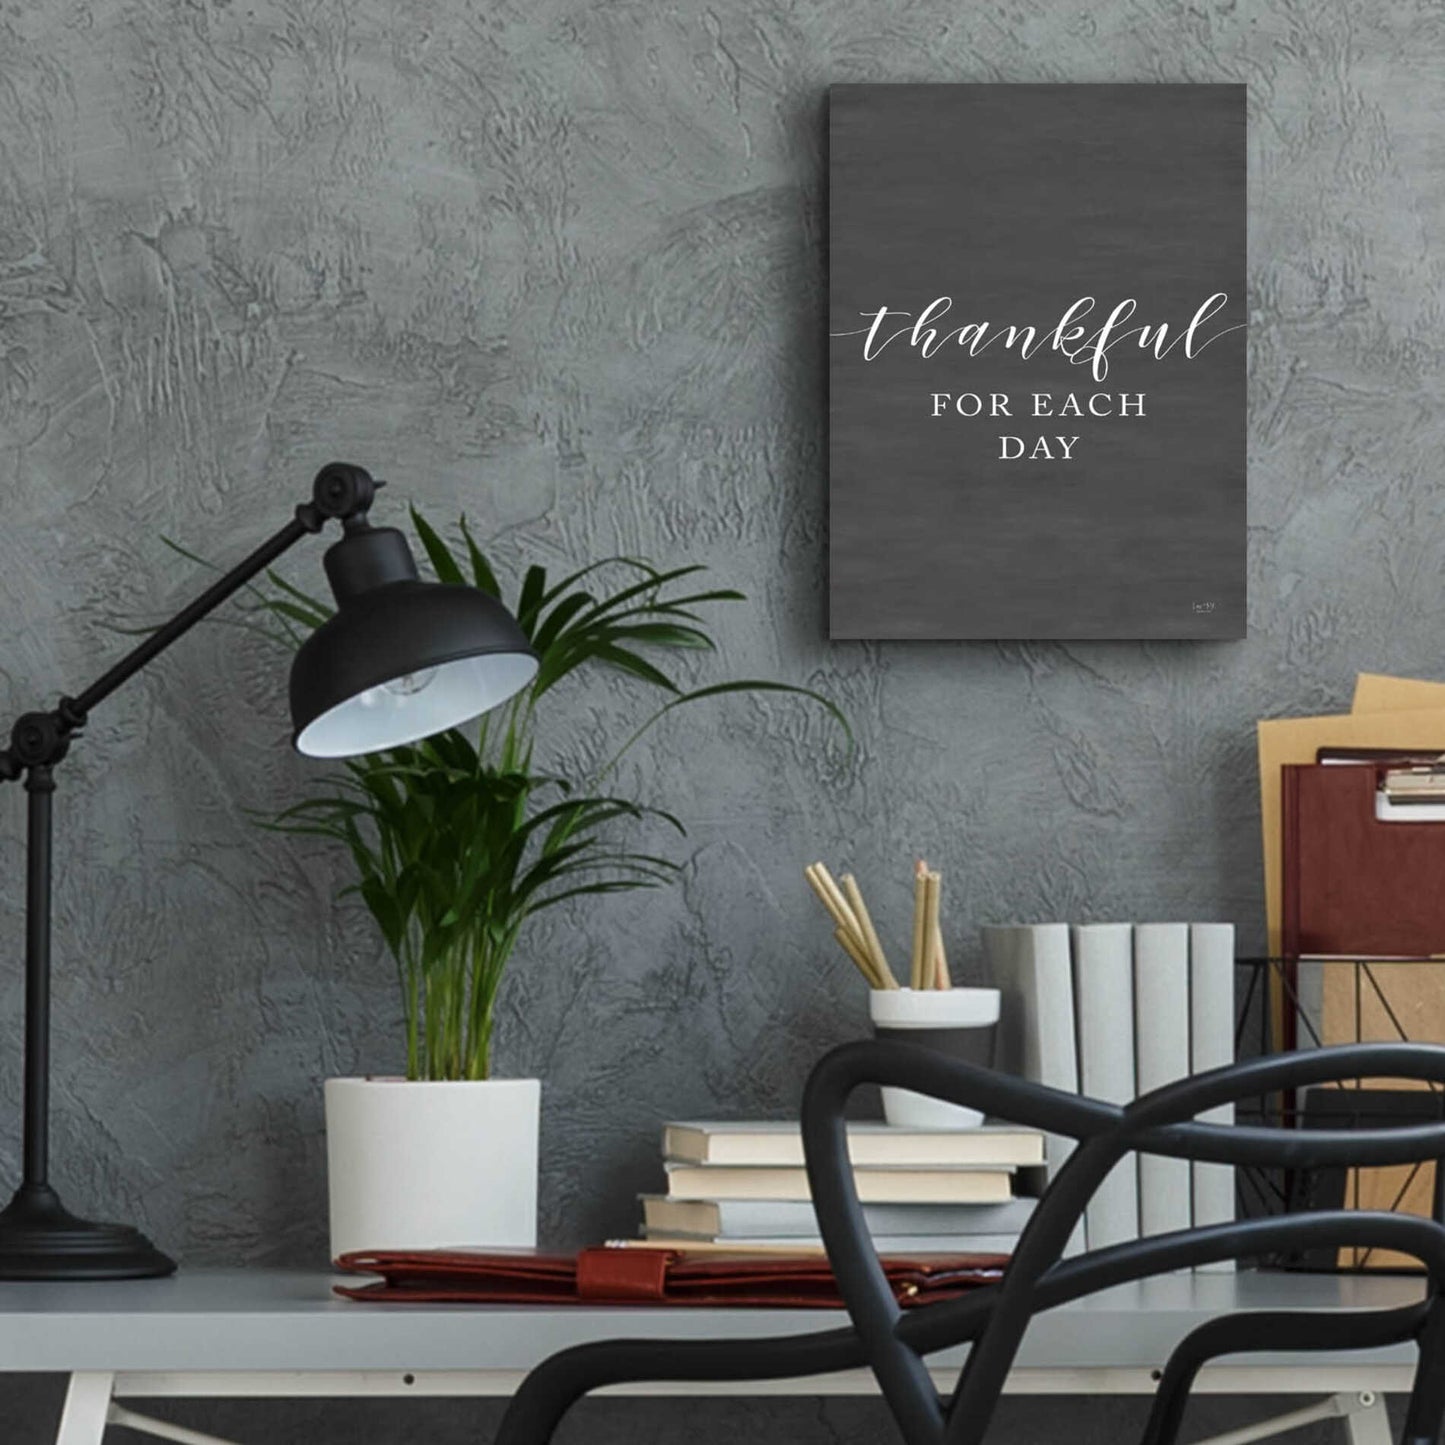 Epic Art 'Thankful for Each Day' by Lux + Me Designs, Acrylic Glass Wall Art,12x16